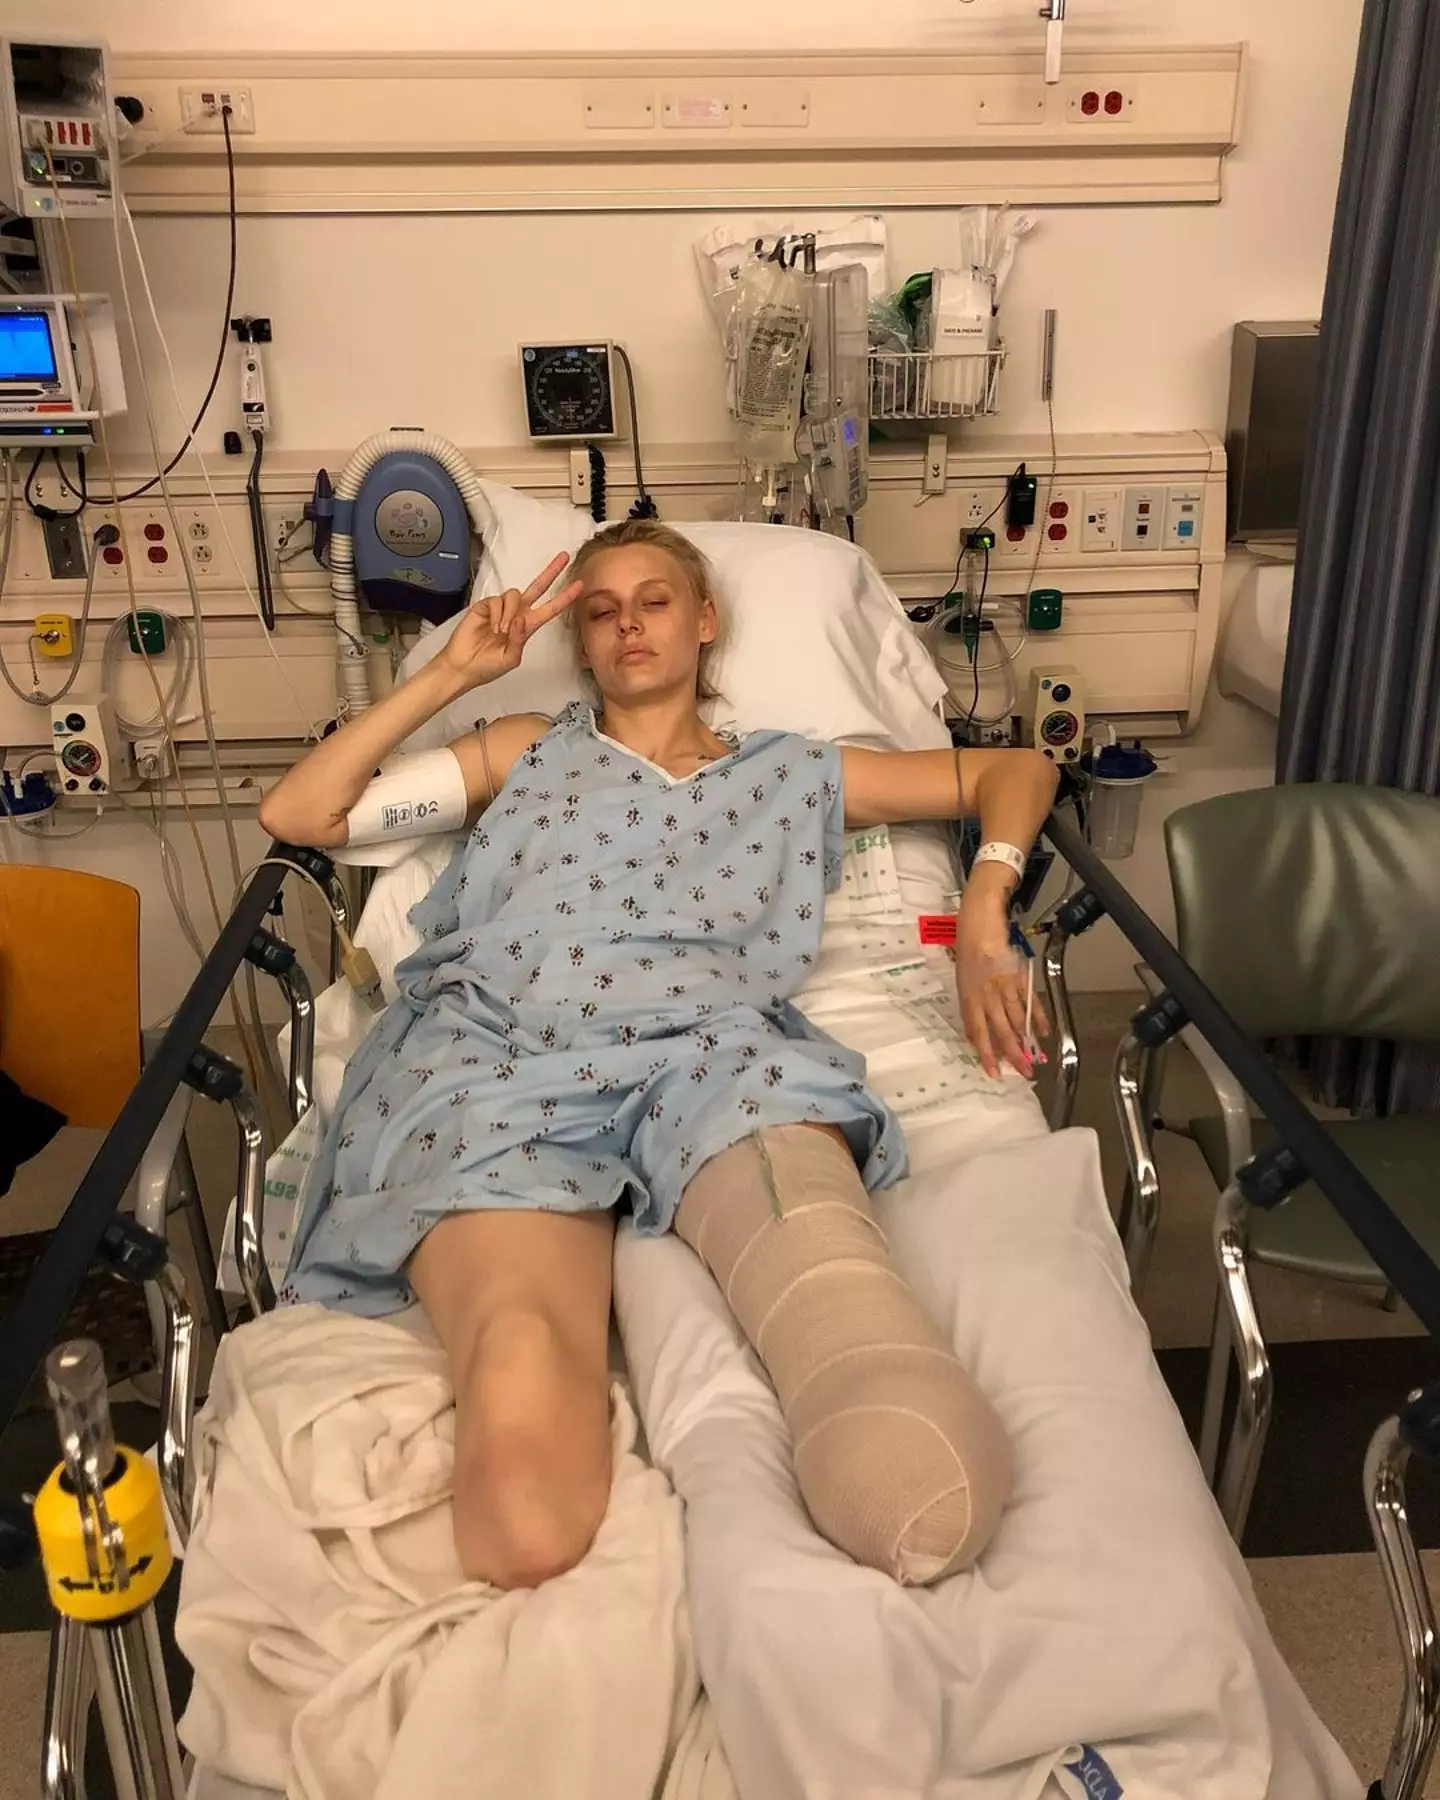 Lauren opted to have her left leg amputated after losing her right. (Instagram/@theimpossiblemuse)